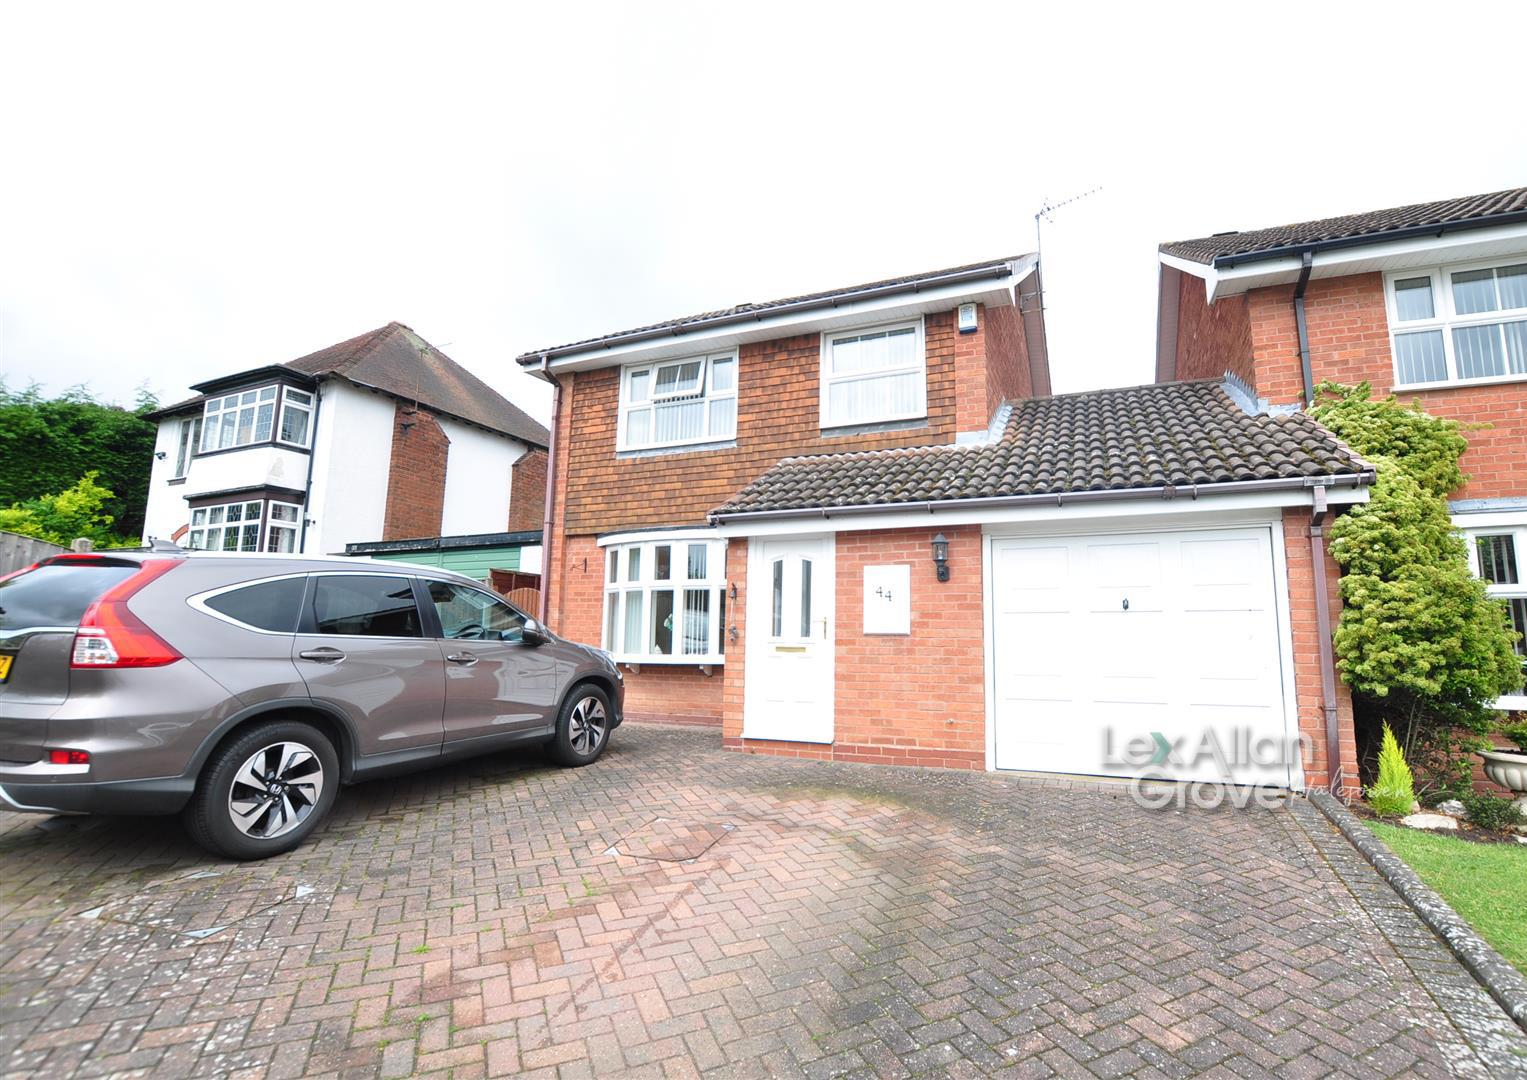 4 bed detached house for sale in Cherry Tree Lane, Halesowen  - Property Image 1